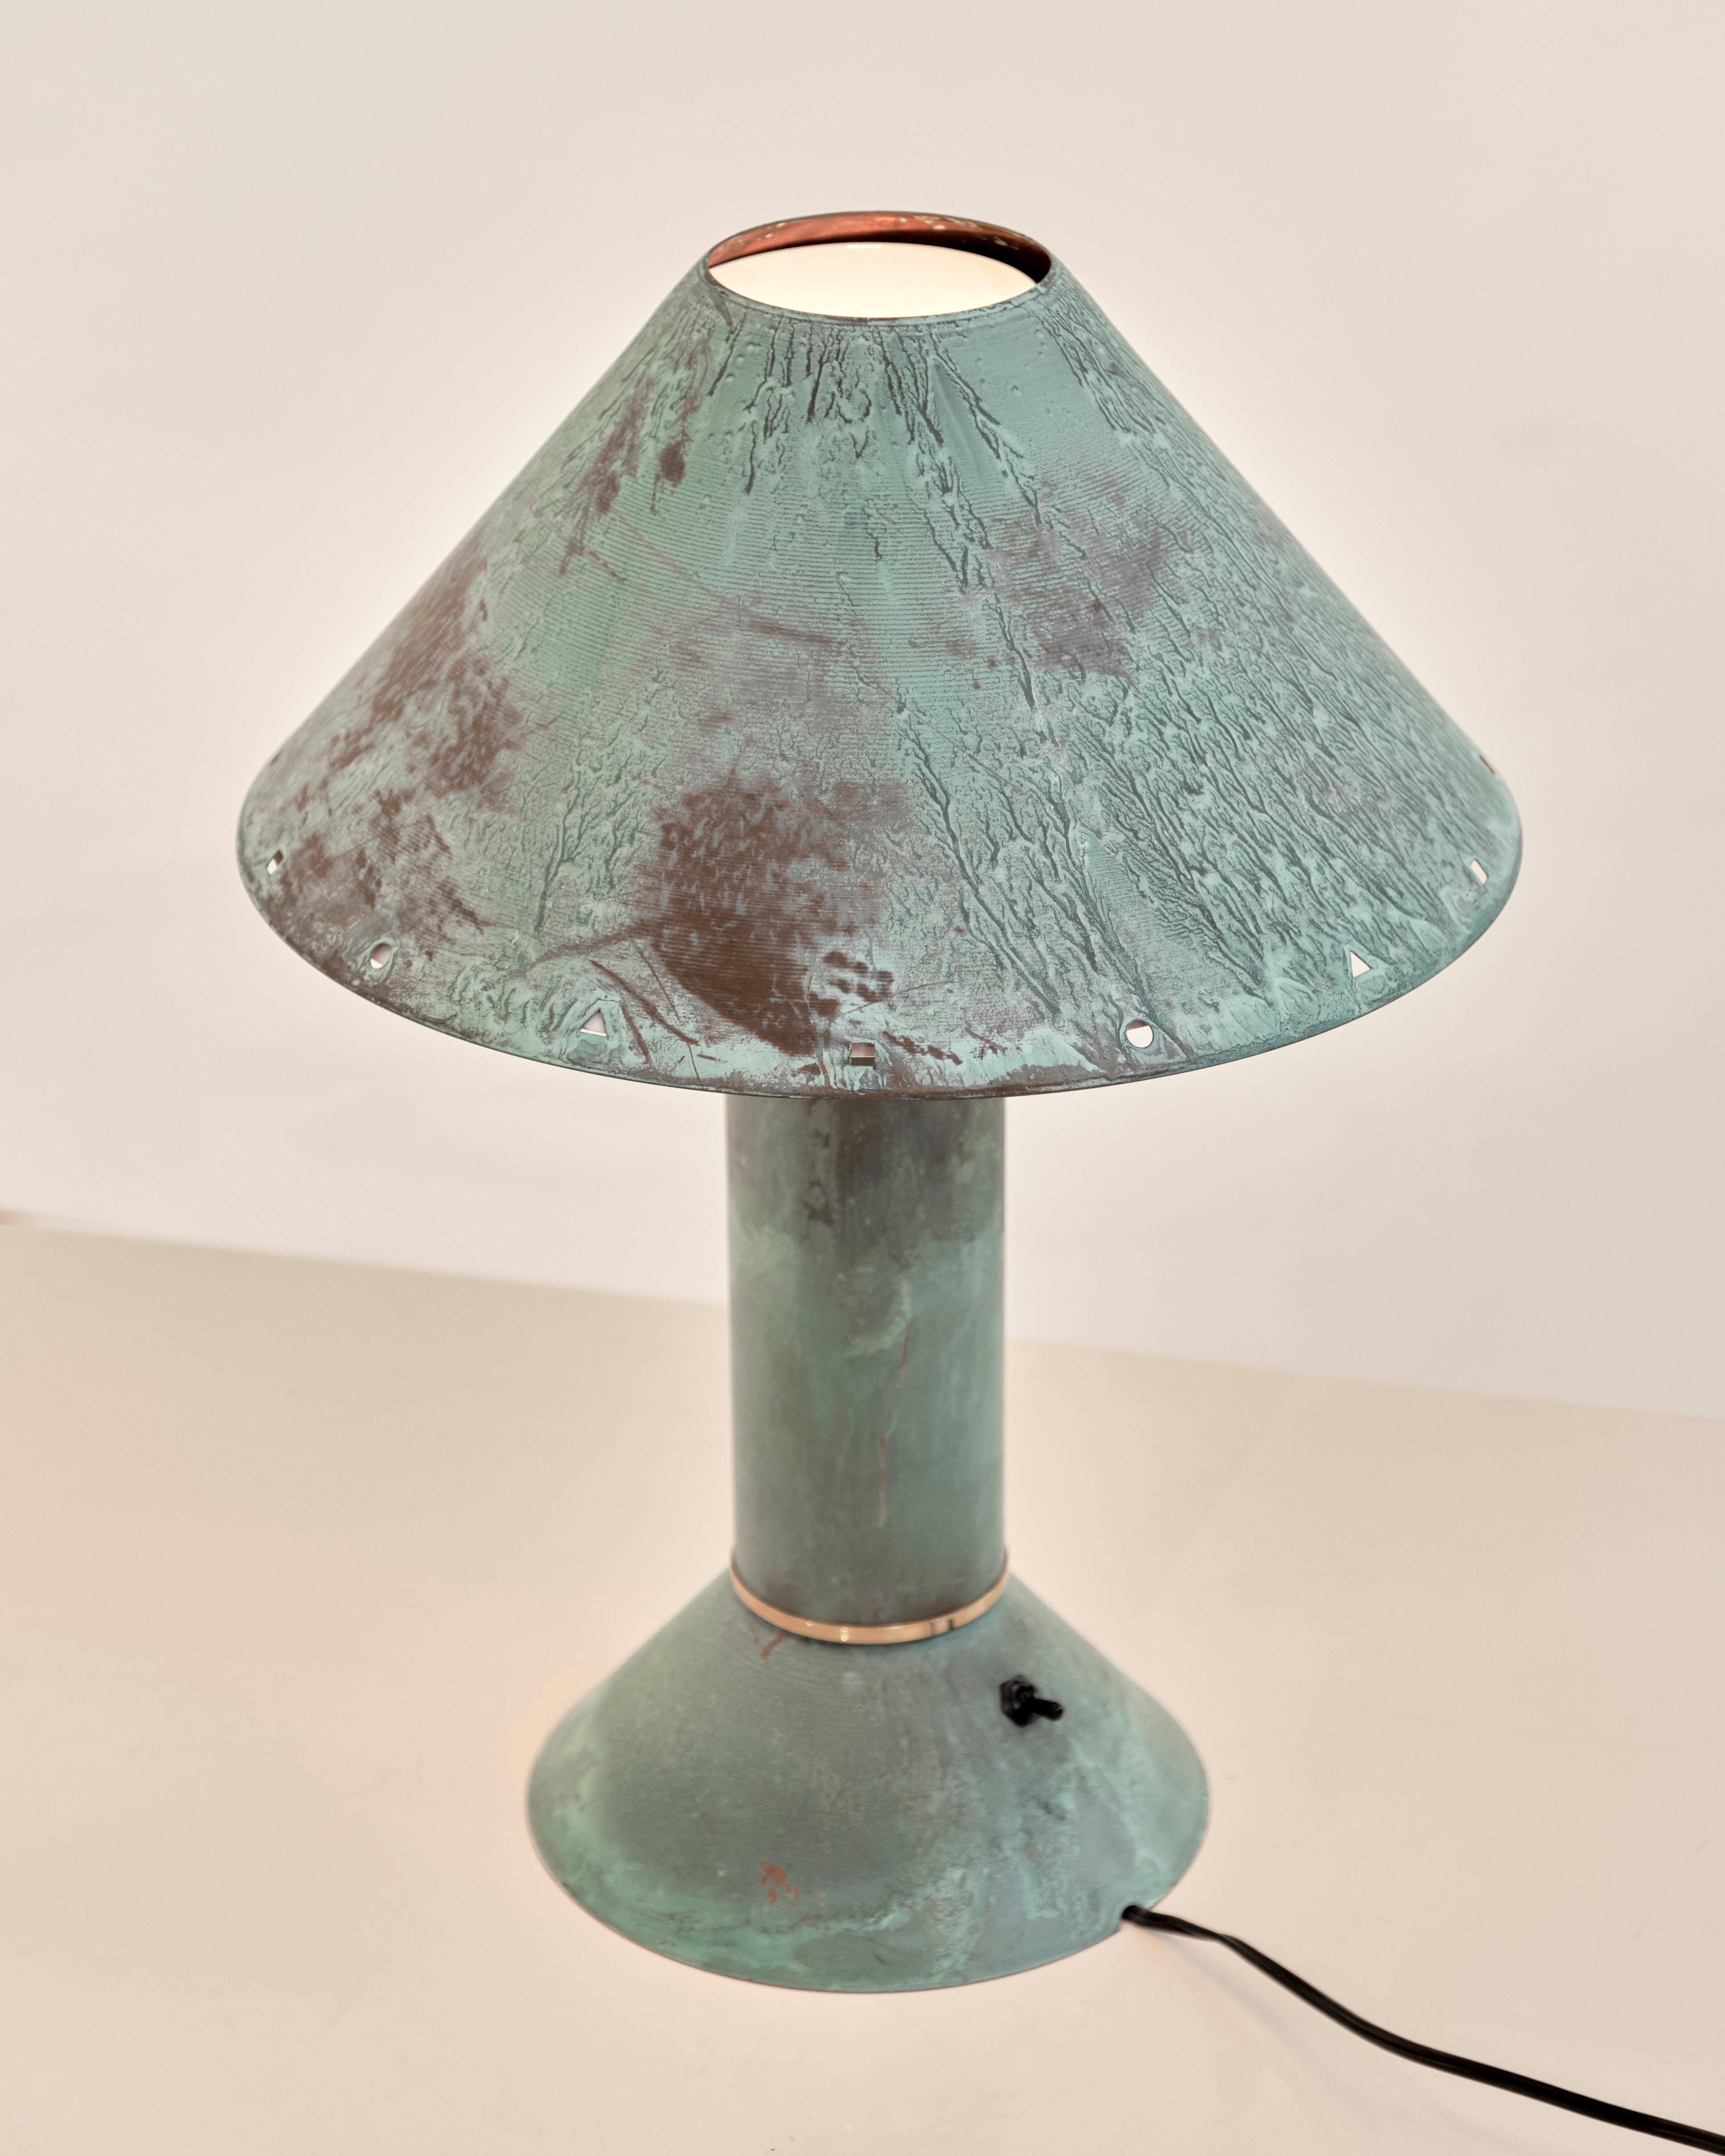 Pair of 1980's Patinated Copper lamps by famed Postmodern Californian designer, Ron Rezek. More commonly found in galvanized metal, this pair in oxidized copper are much more rare and sought after. In great condition. 